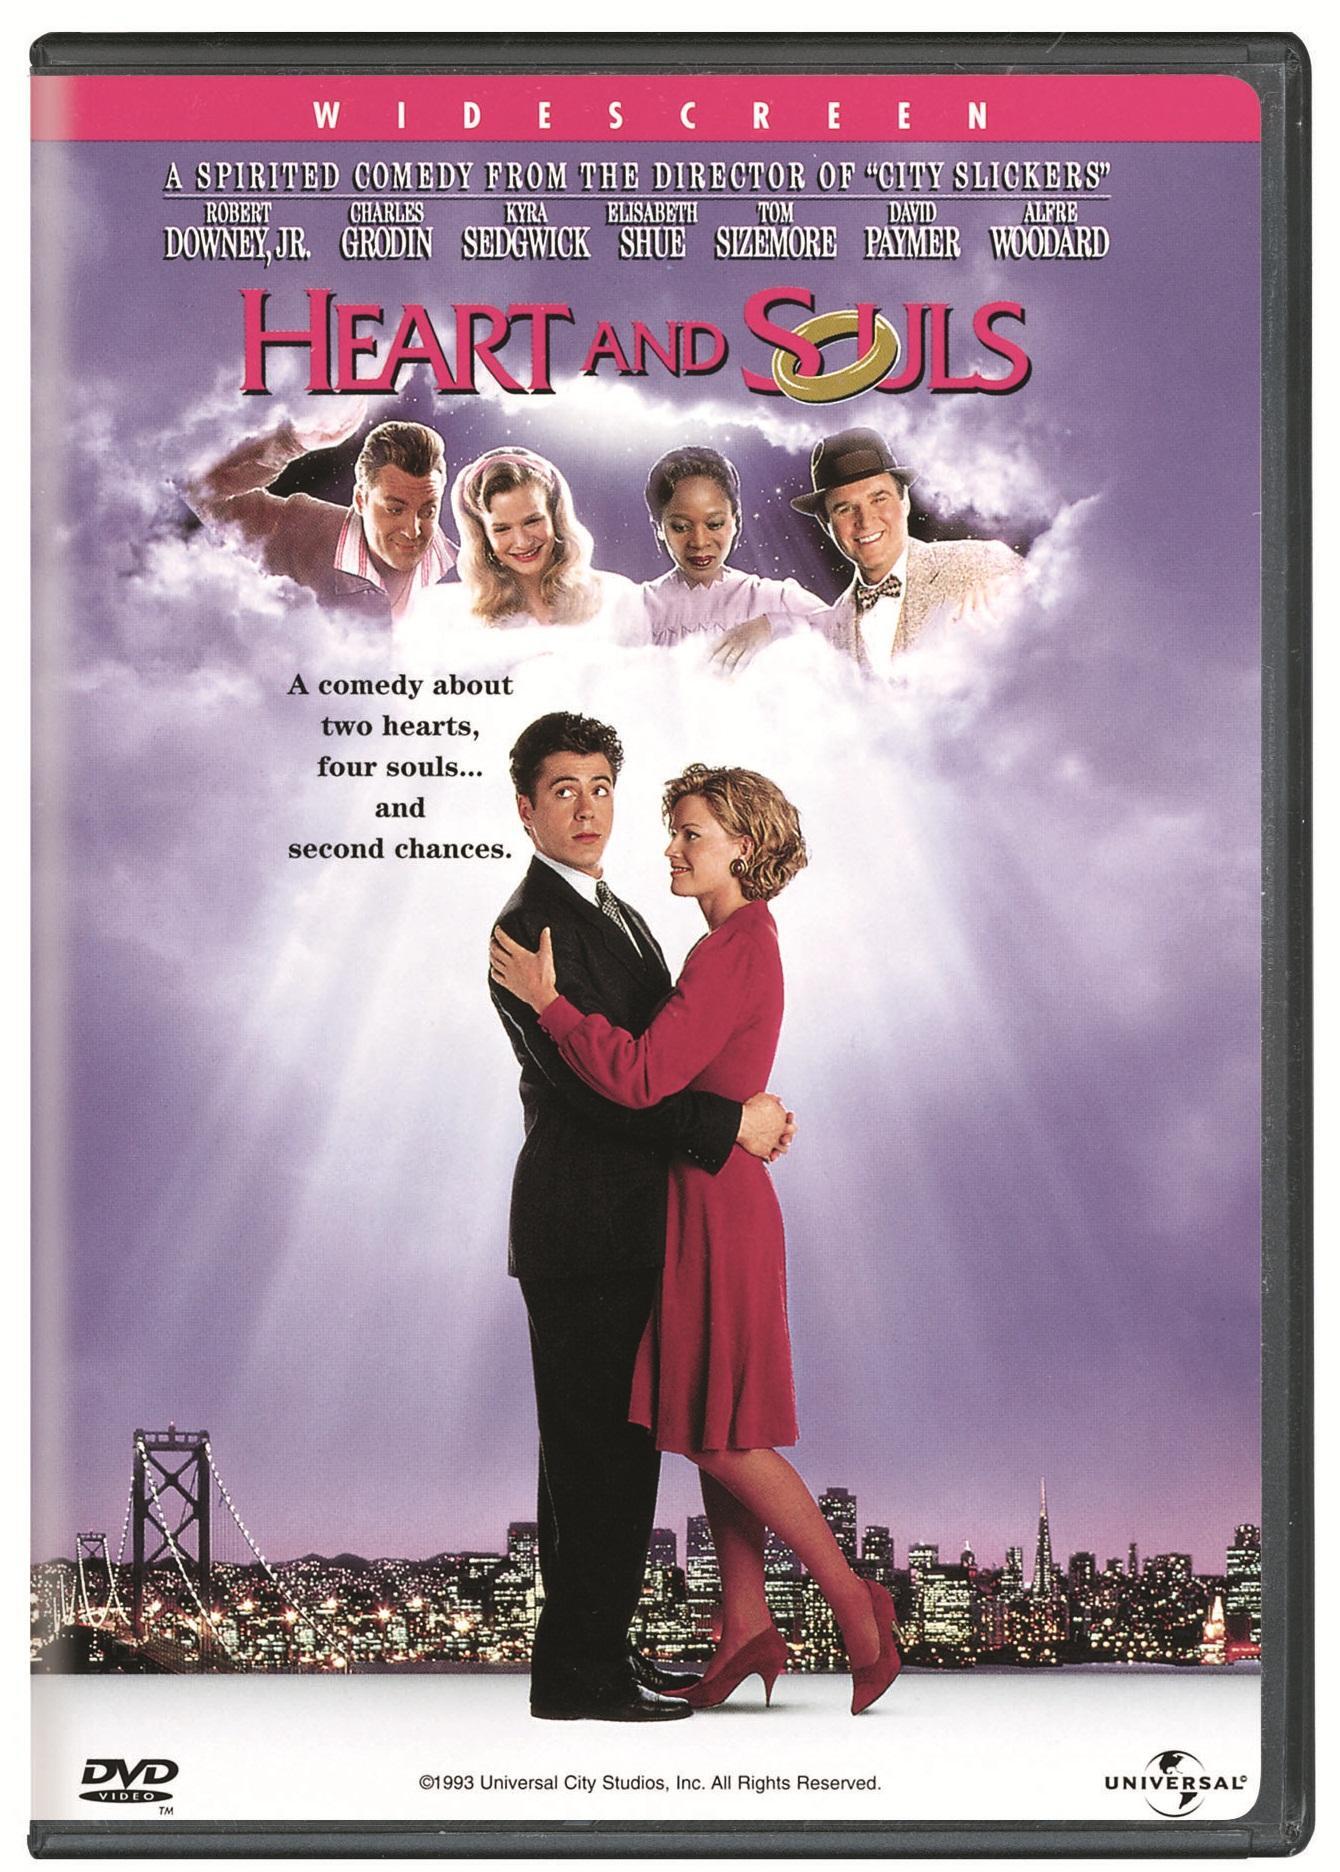 Heart And Souls - DVD [ 1993 ]  - Comedy Movies On DVD - Movies On GRUV